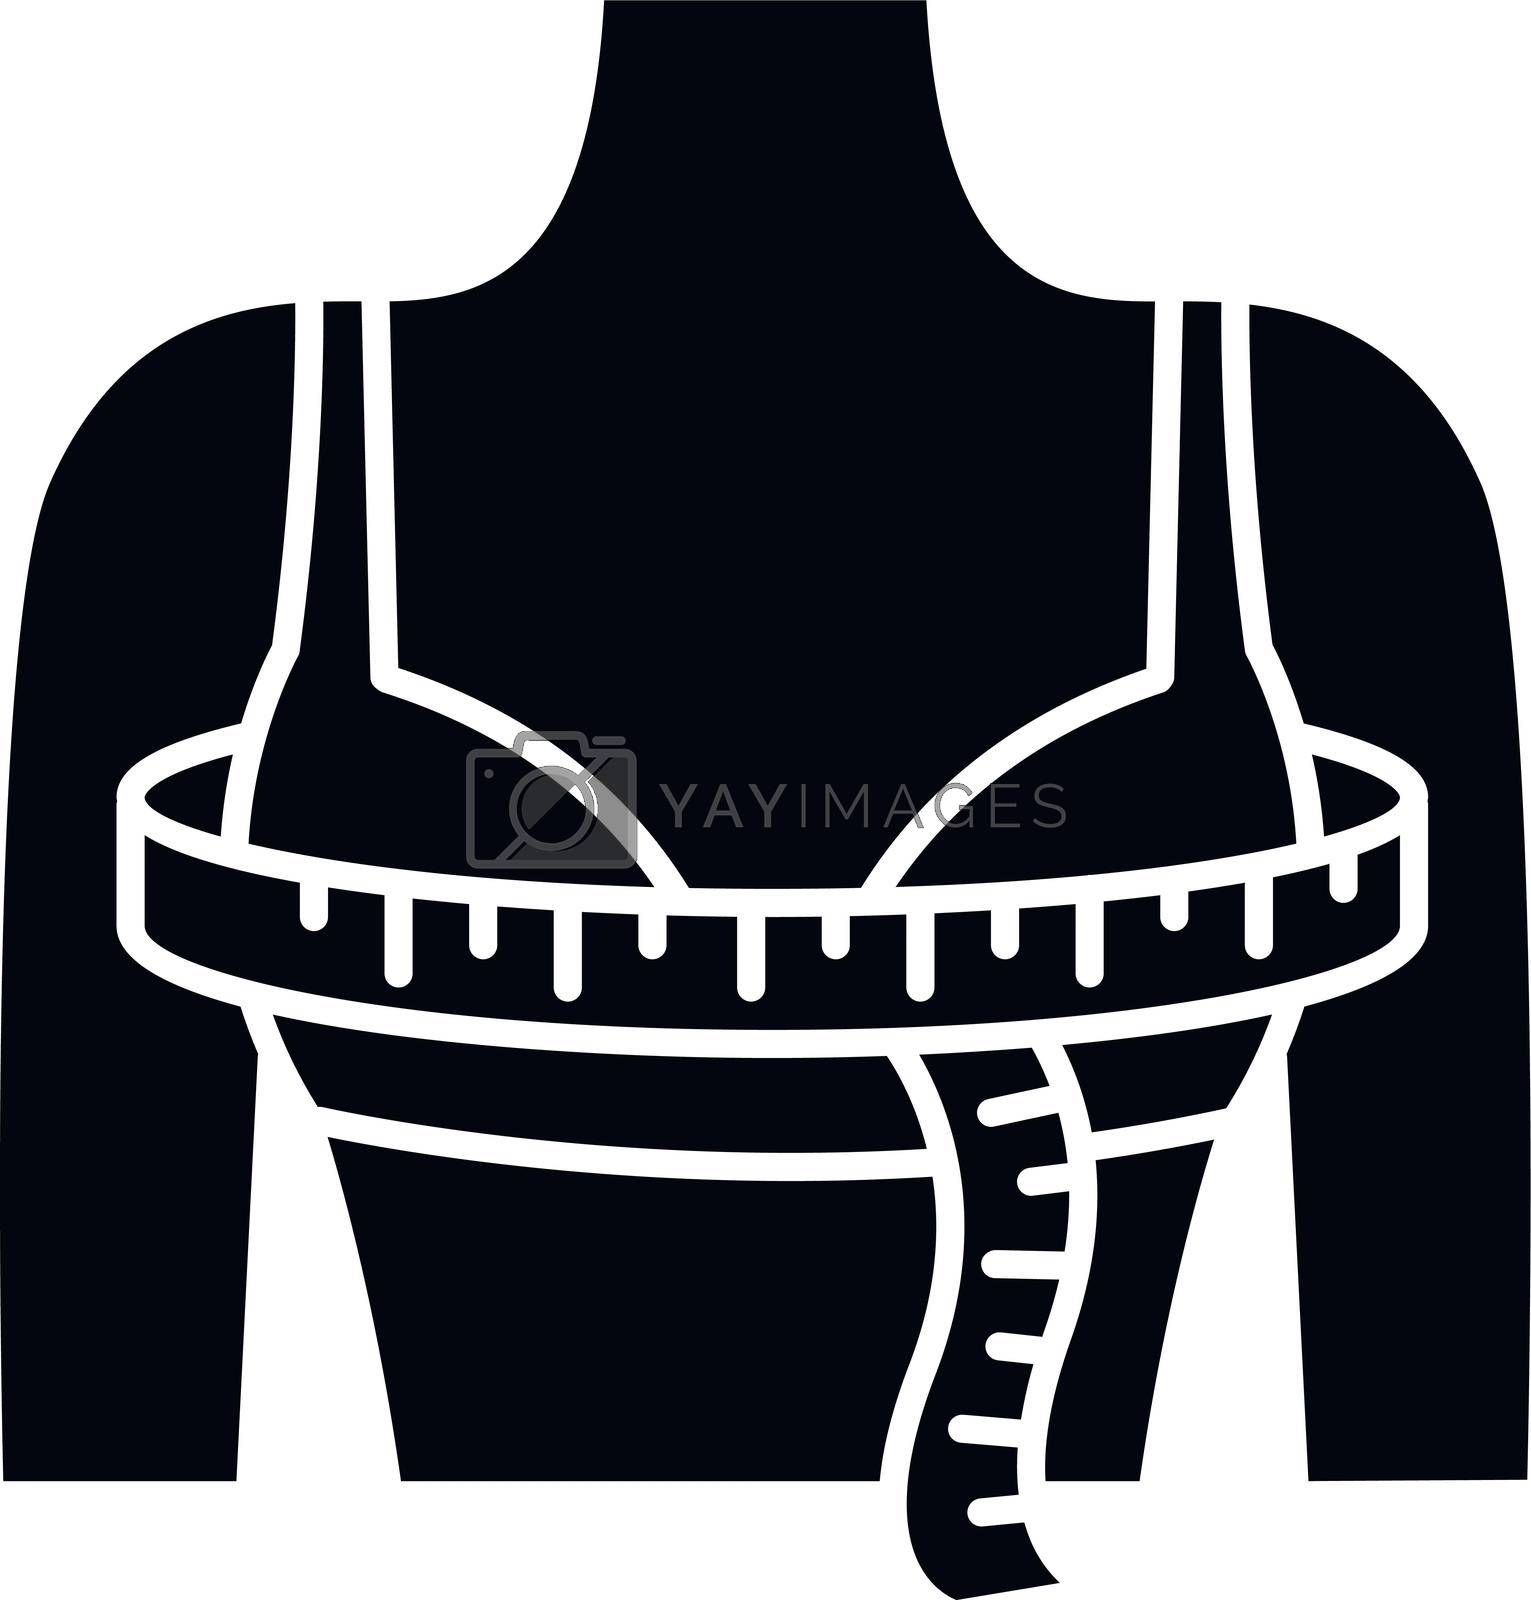 Royalty free image of Bust circumference black glyph icon. Female upper body measurements, tailoring parameters silhouette symbol on white space. Bust width specification for bespoke clothing. Vector isolated illustration by bsd